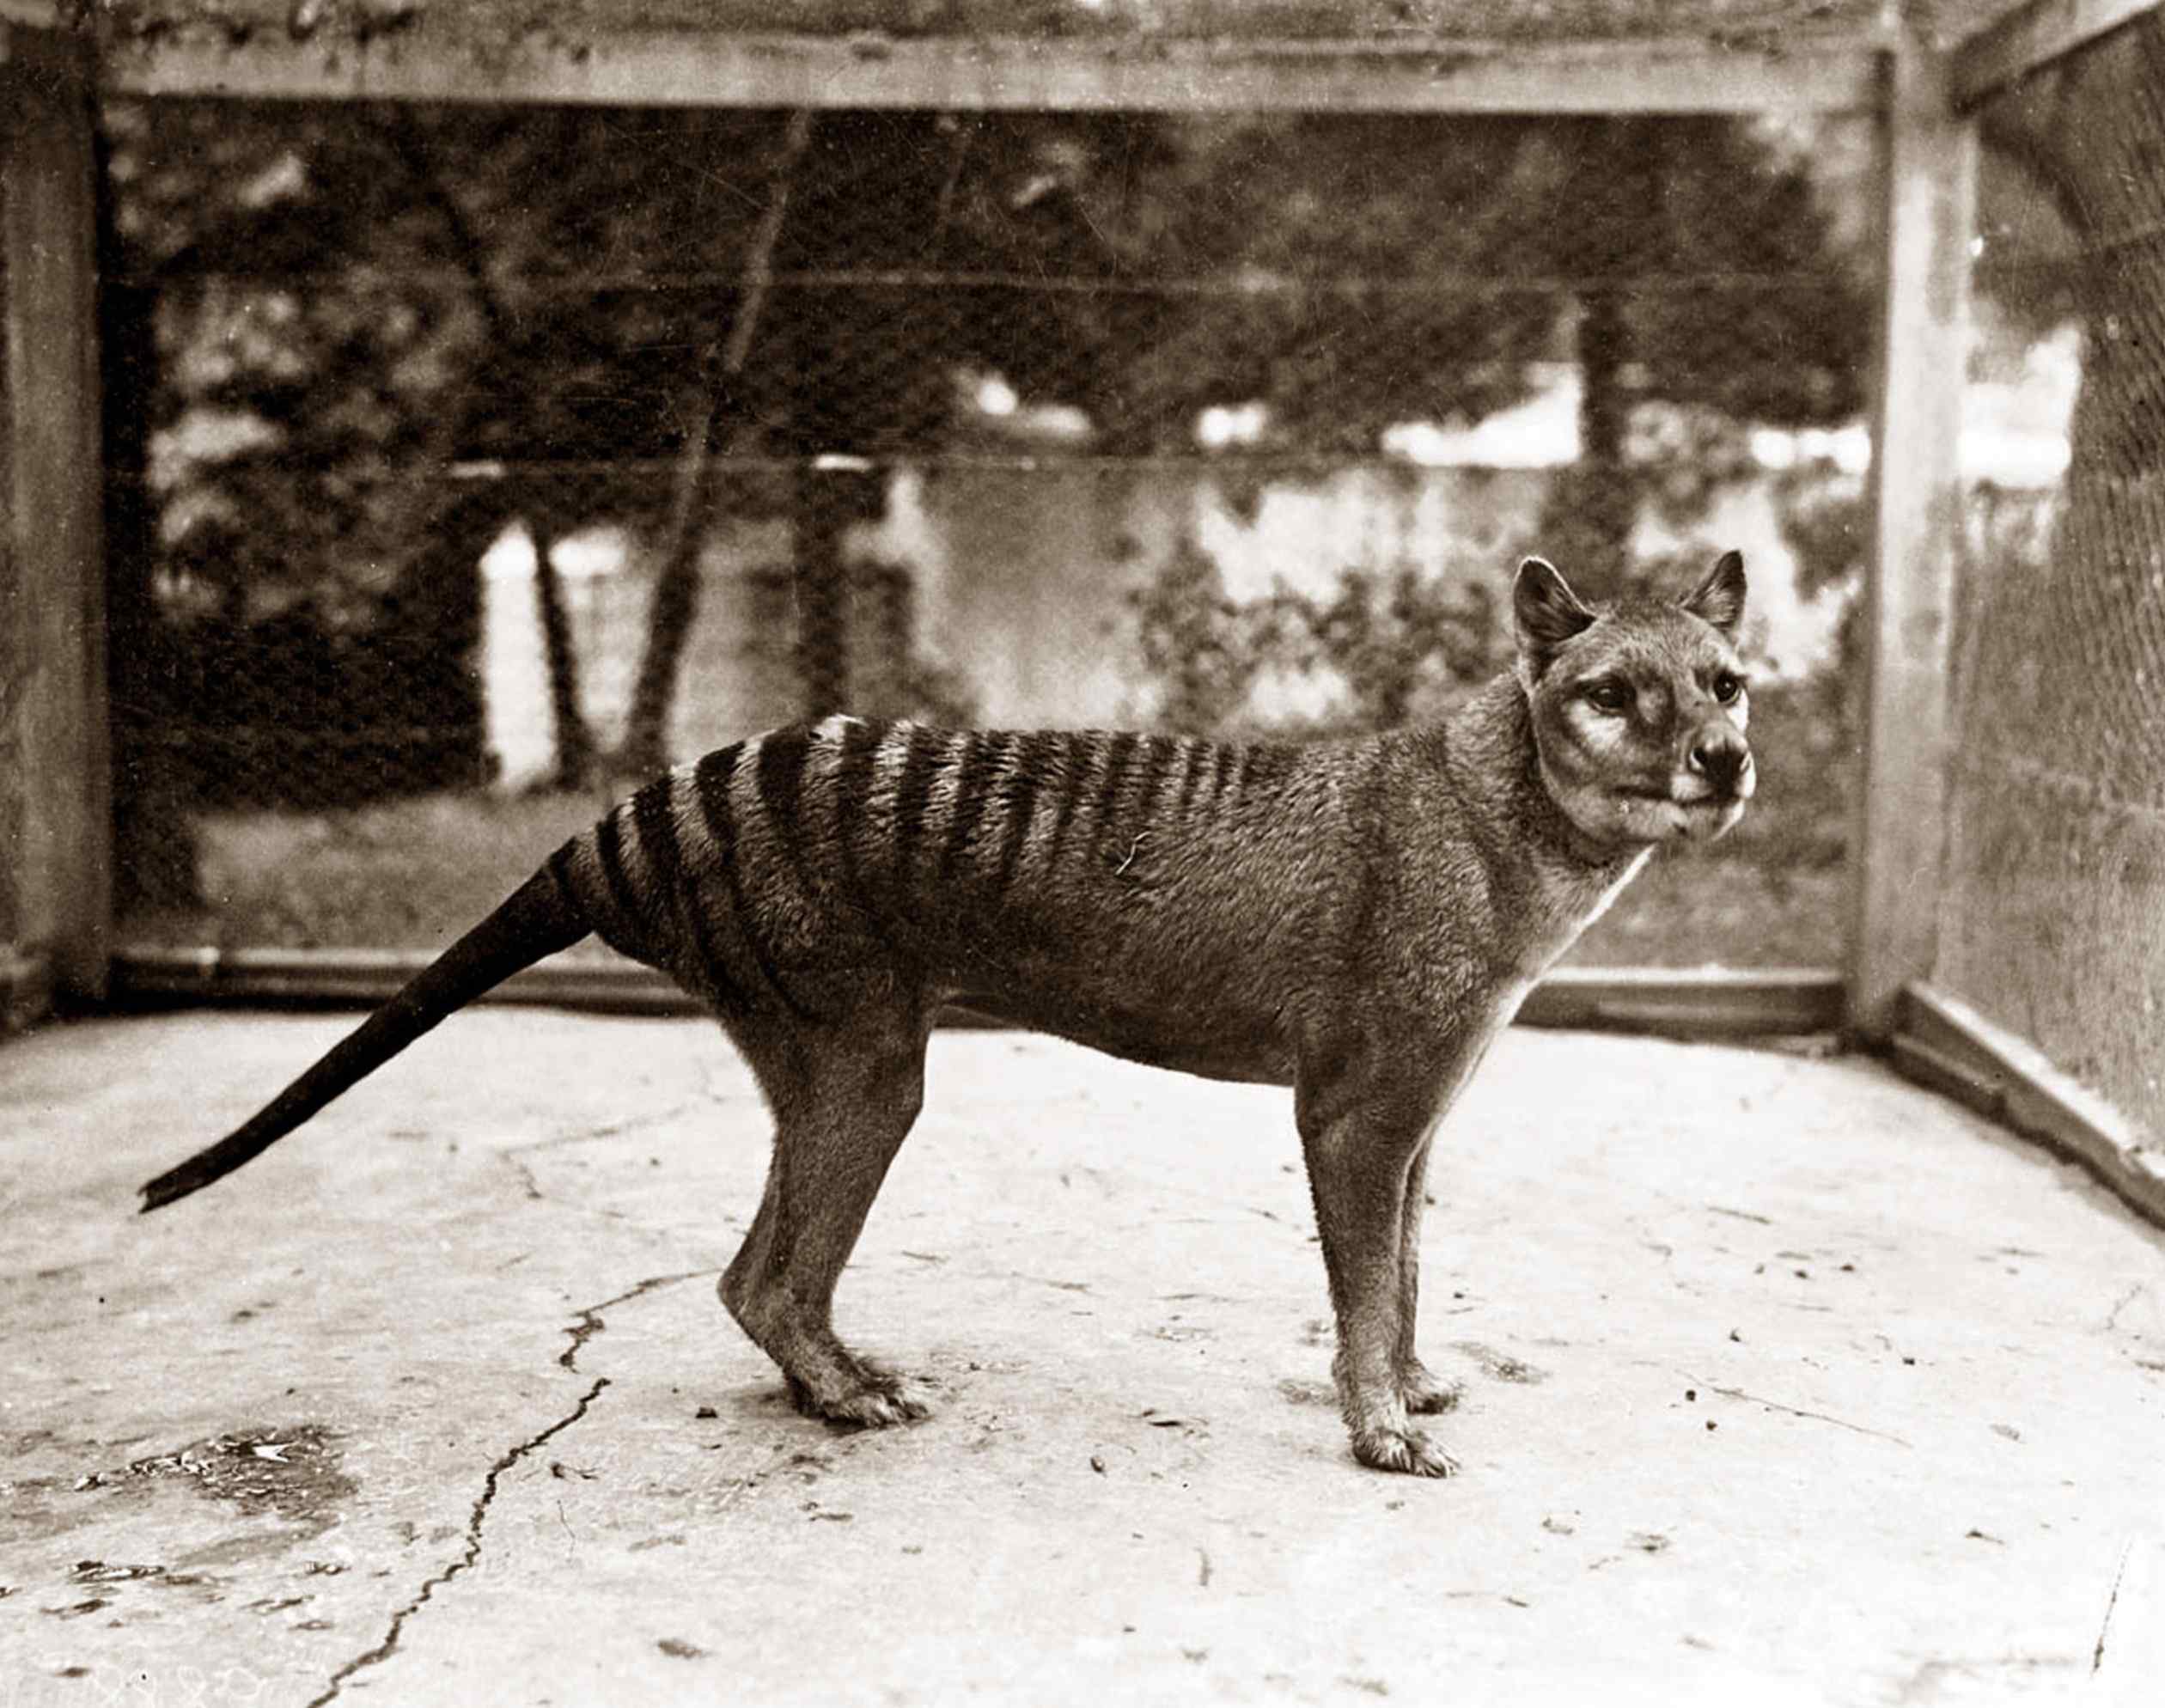 The last known Tasmanian tiger died in captivity in 1936. But a study suggests hundreds more sightings into the 20th century.